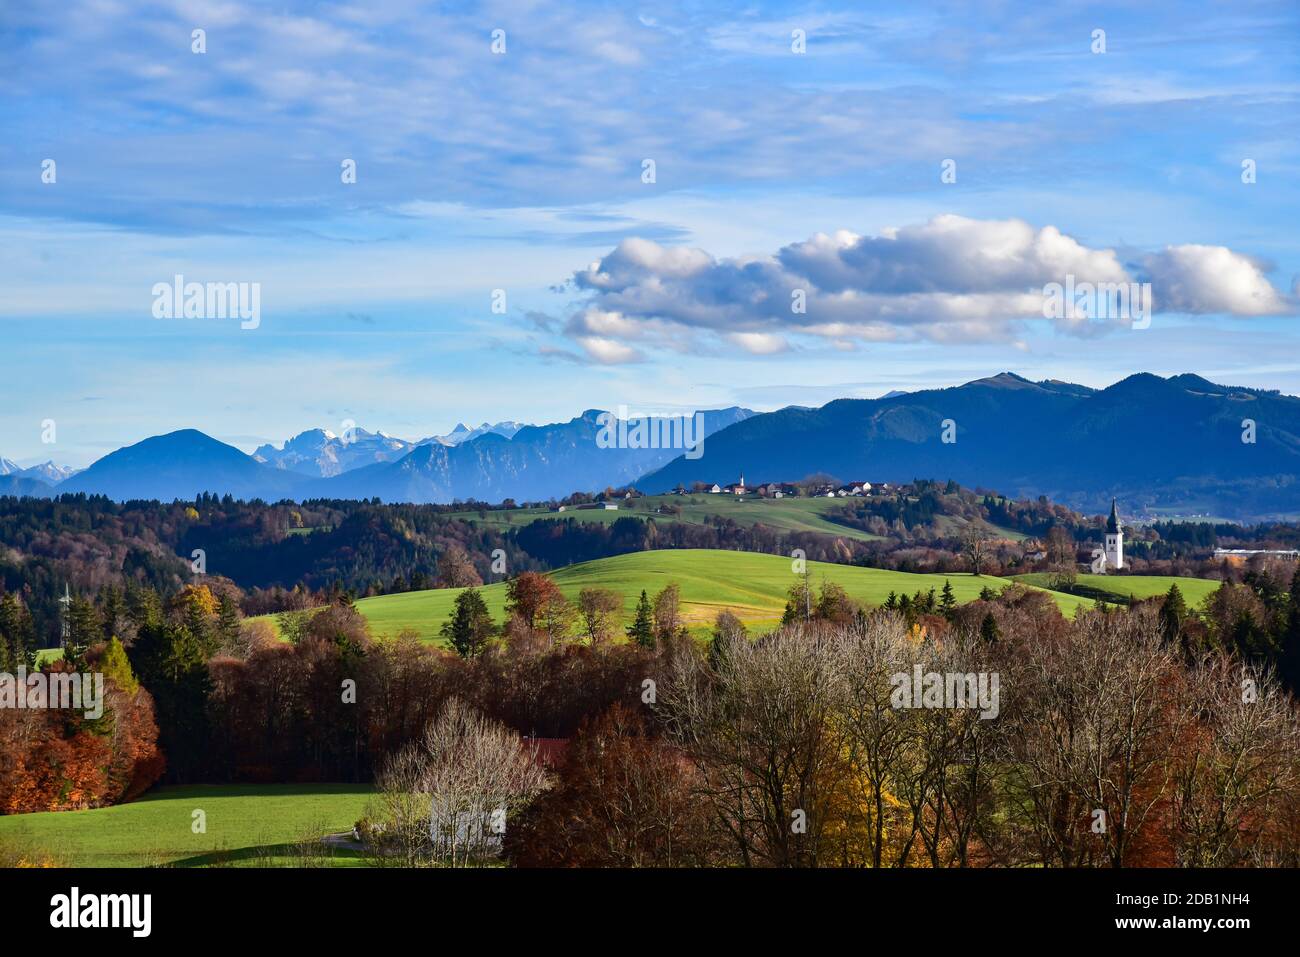 View into the Ammergau Alps, in the foreground Rottenbuch, in the background left the snow-capped Karwendel Mountains, Bavaria, Germany, Europe Stock Photo